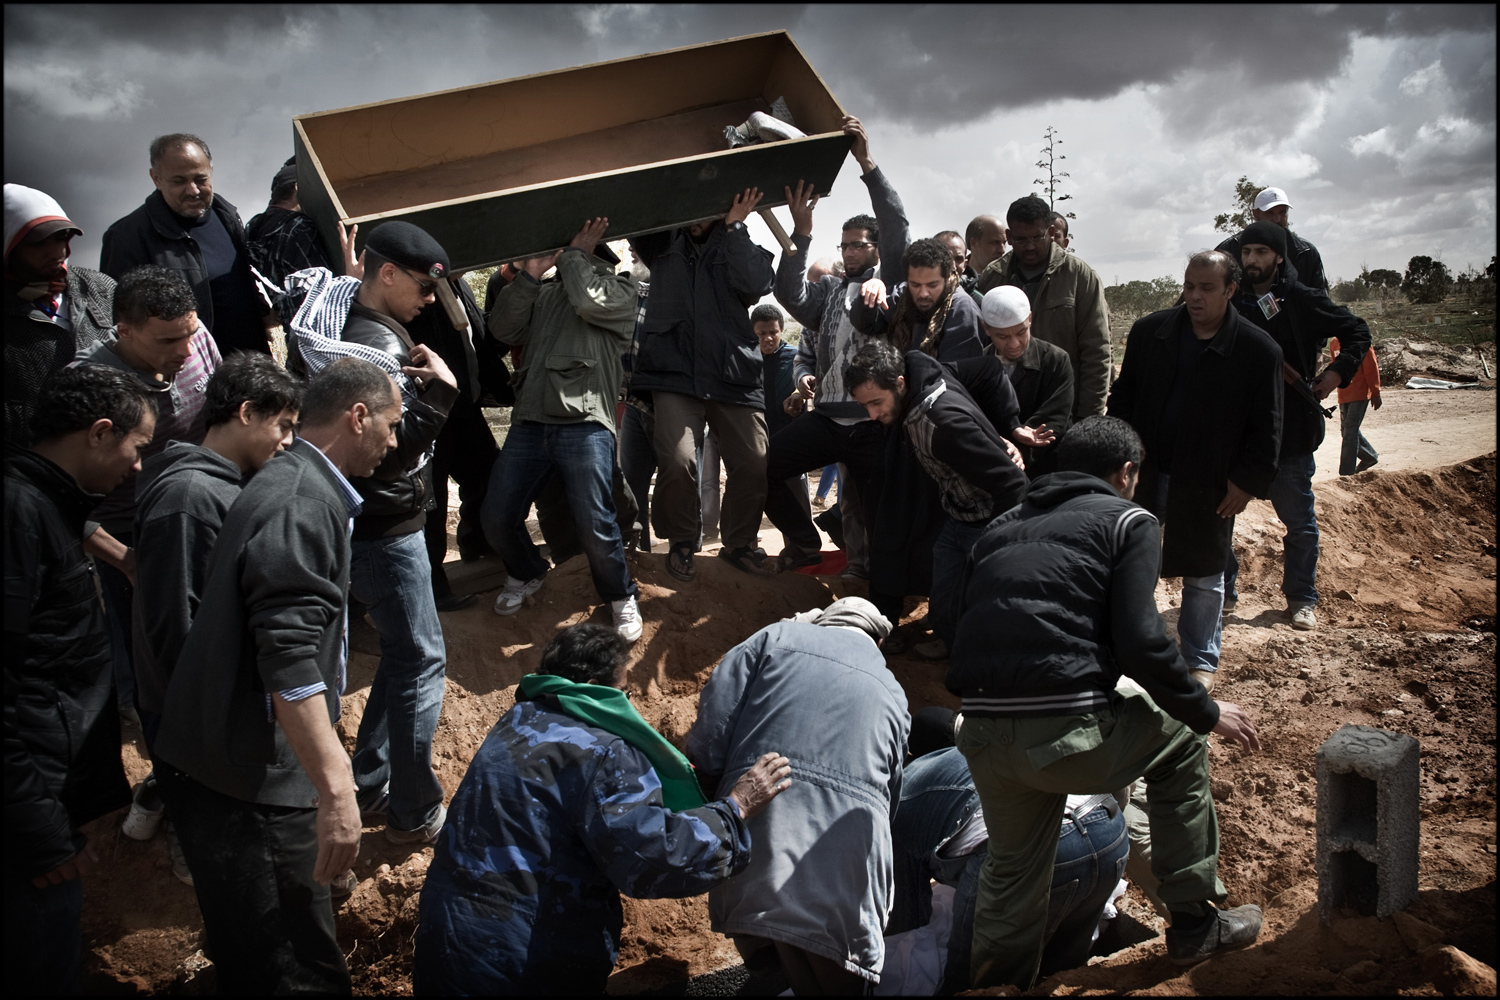 March 20, 2011. Libyan men mourn the dead at a funeral near a hospital in the city of Benghazi.